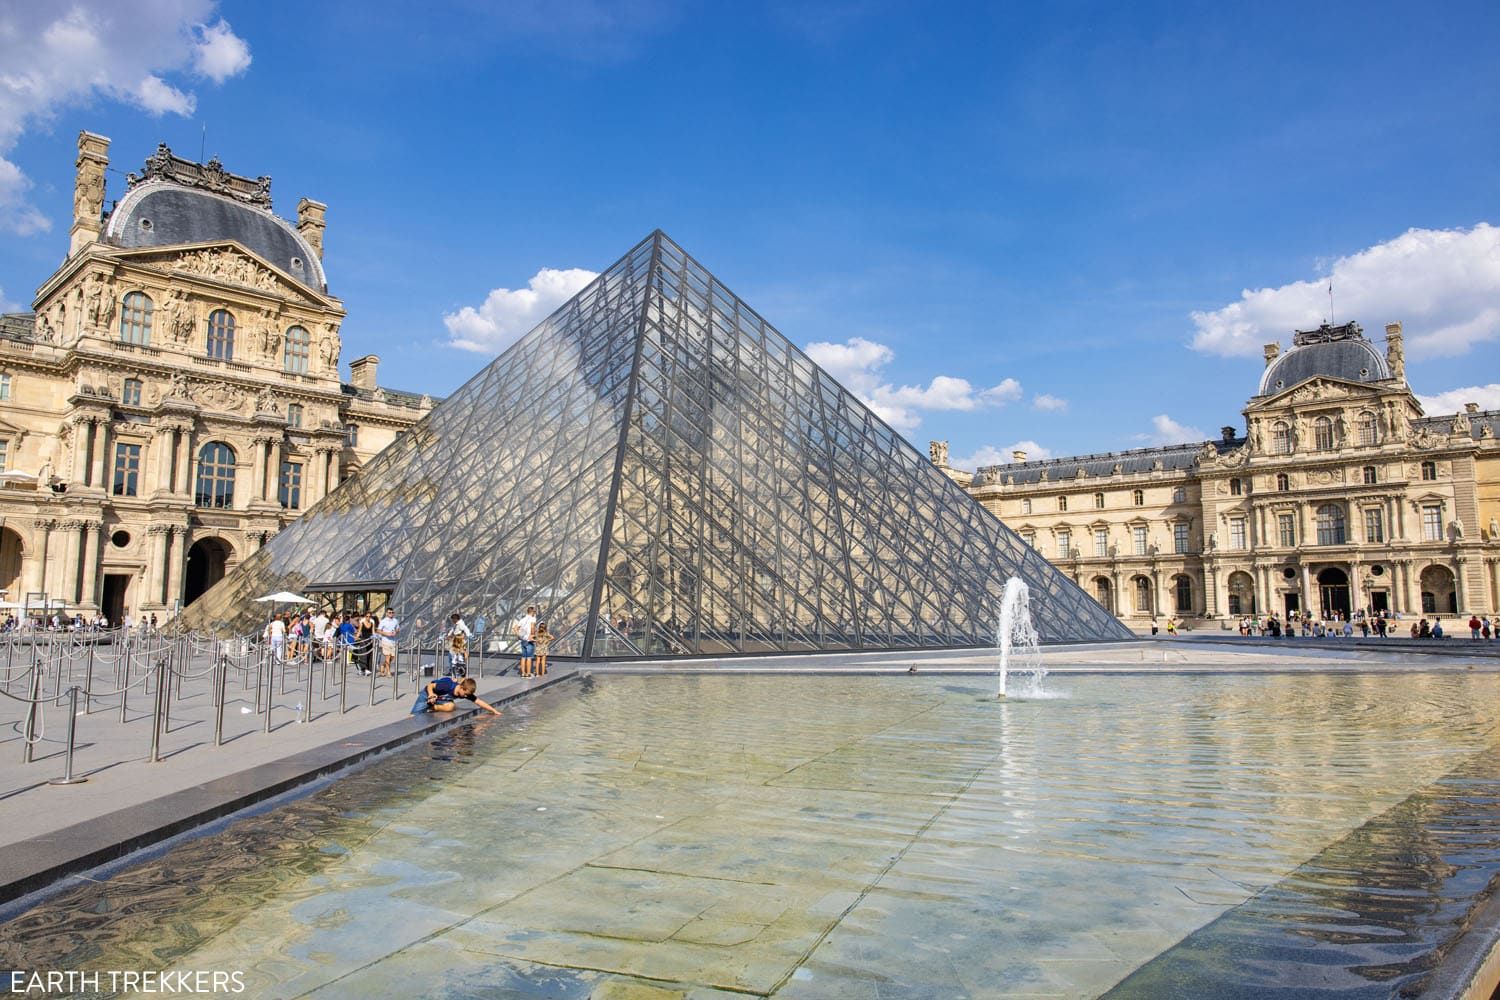 The Louvre Paris | How to visit the Louvre